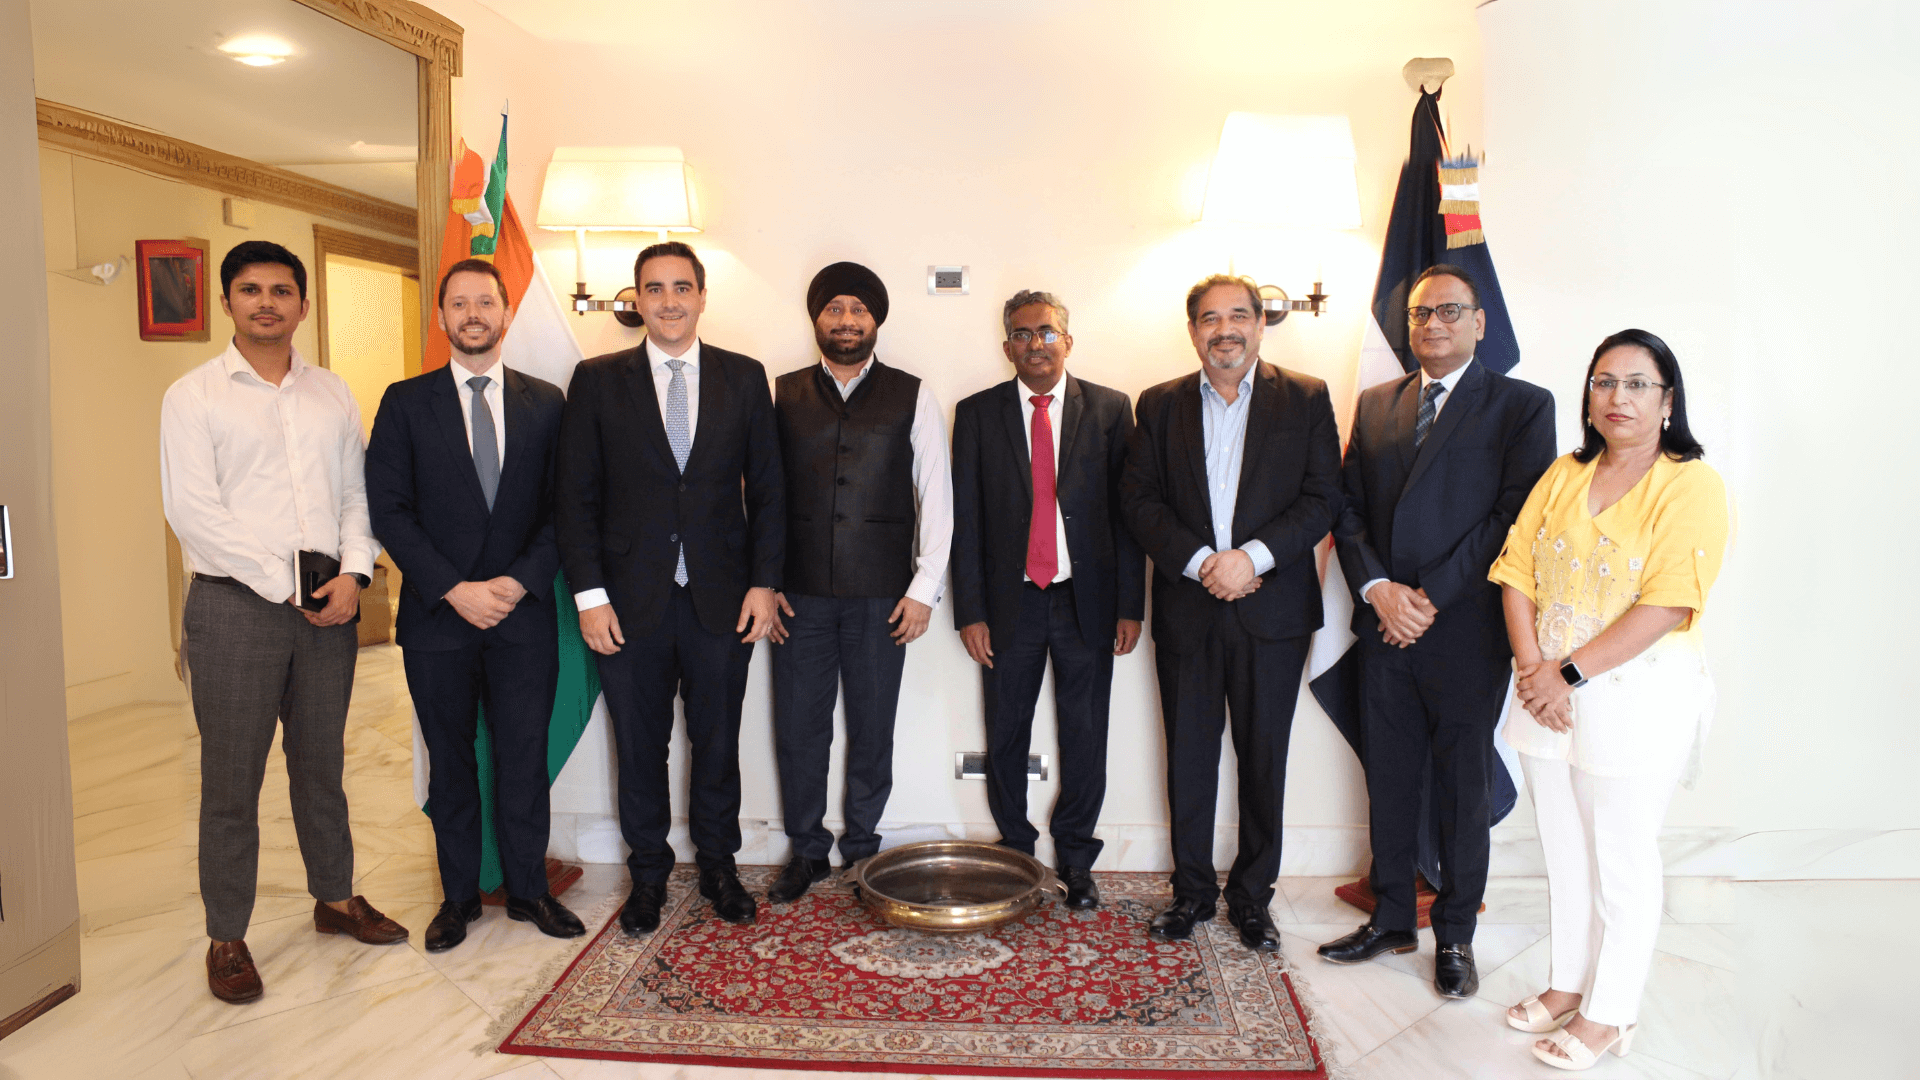 CCD Health and GeBBS Healthcare Solutions Visit the Embassy of India in the Dominican Republic